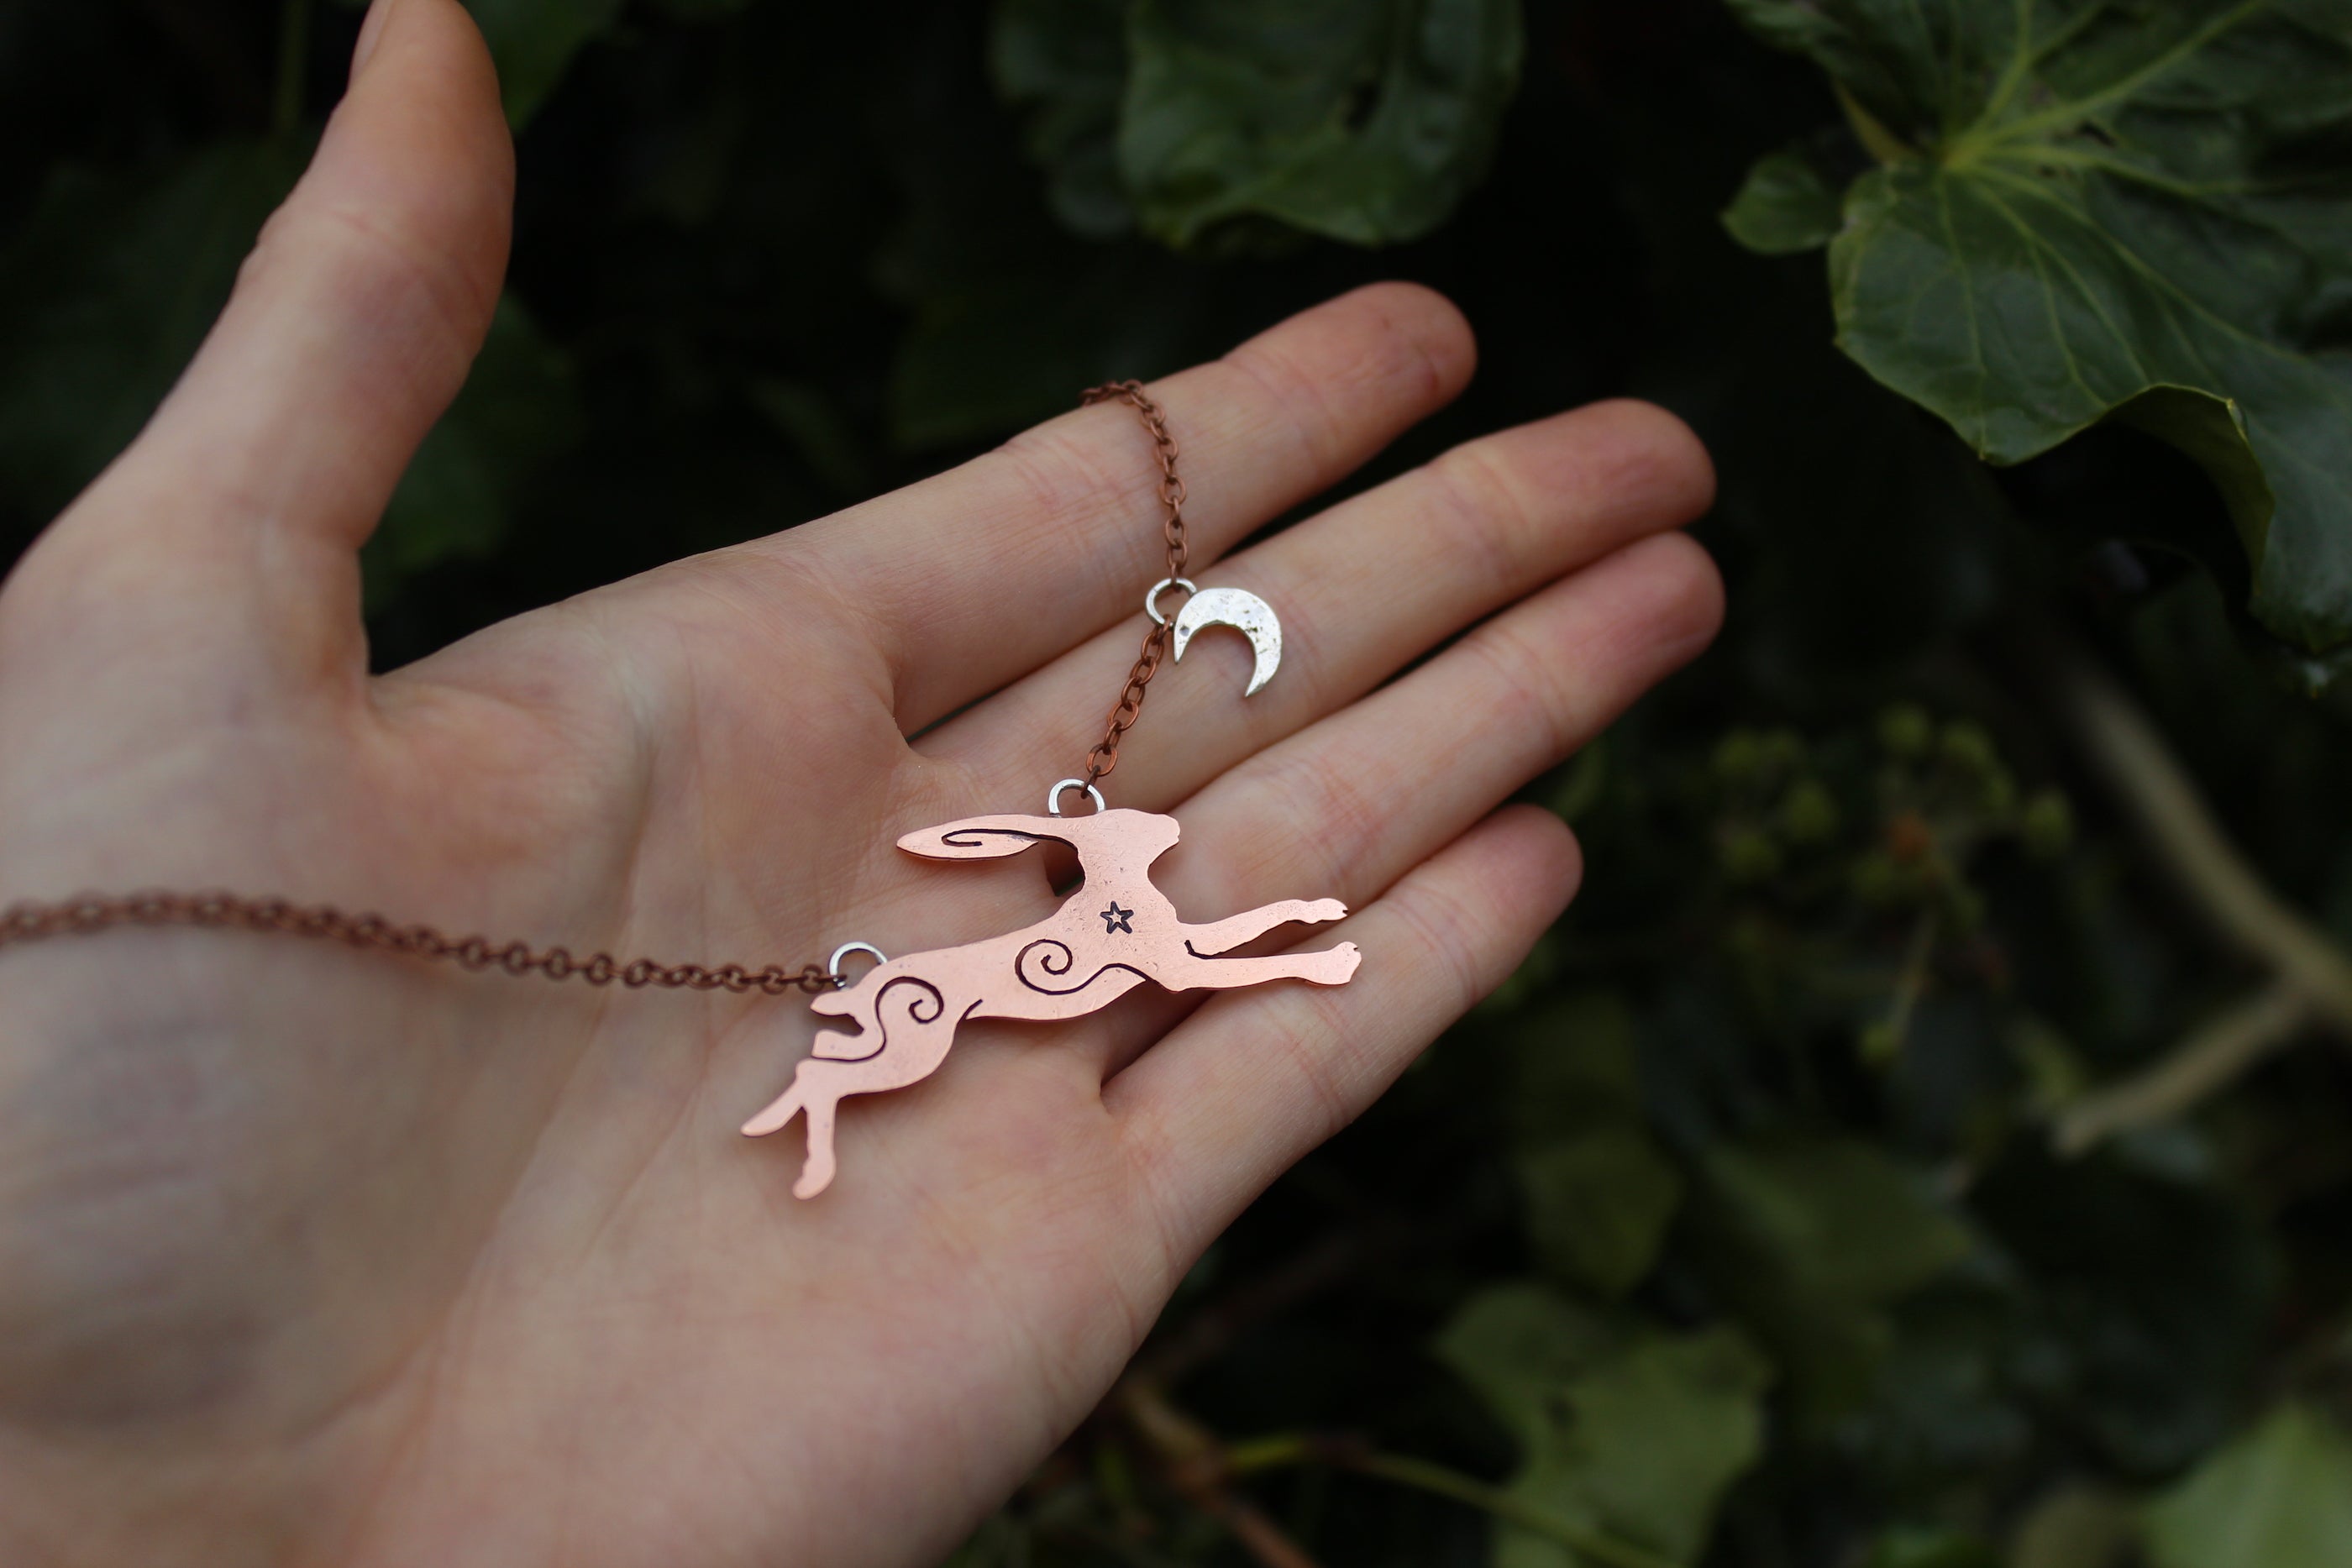 LEAPING LUNAR HARE Handmade Recycled Copper & Sterling Silver Necklace